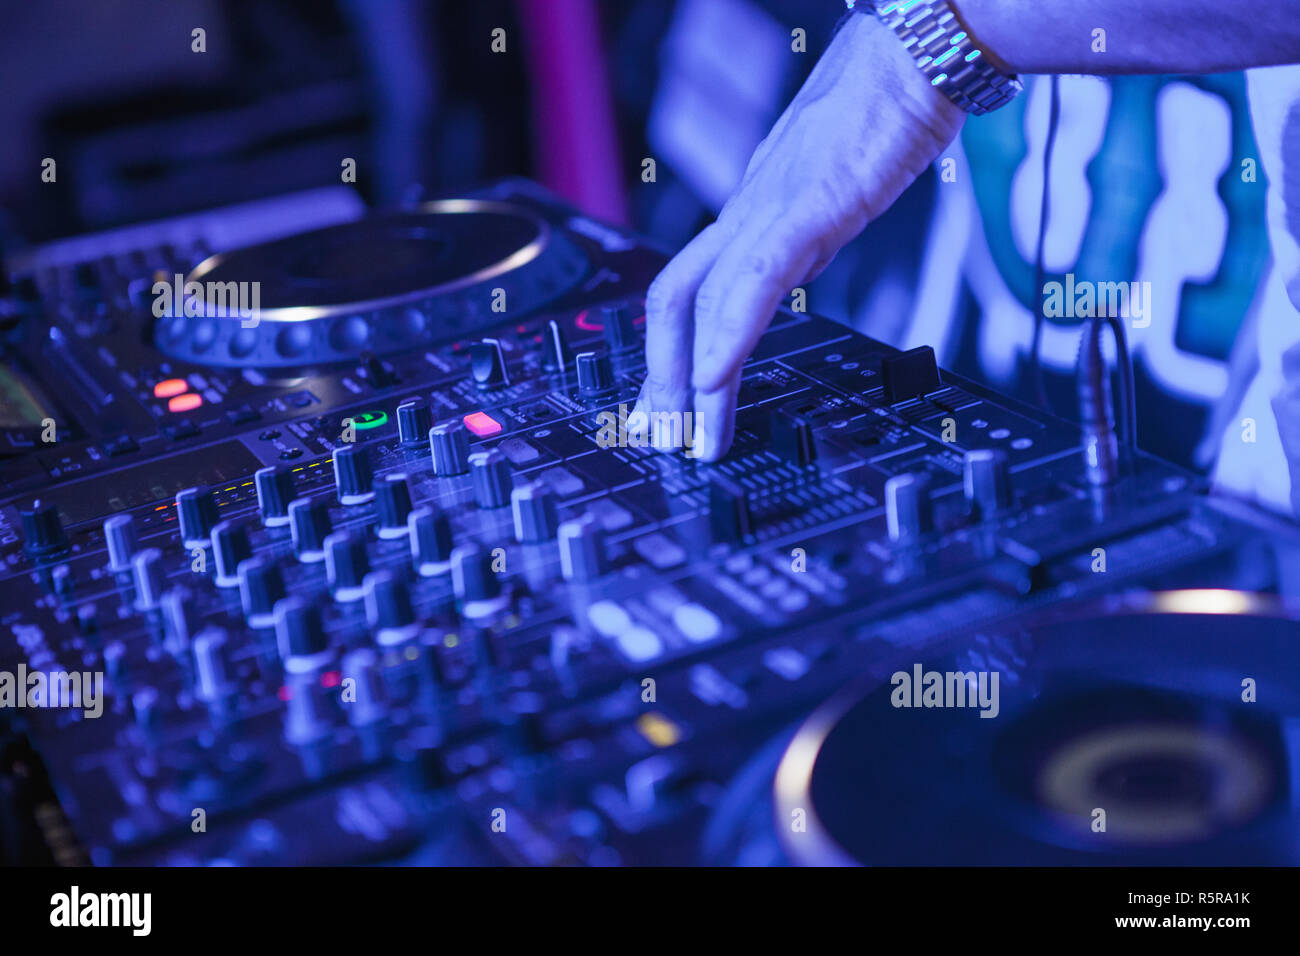 DJ playing music at mixer on colorful blurred background Stock Photo - Alamy